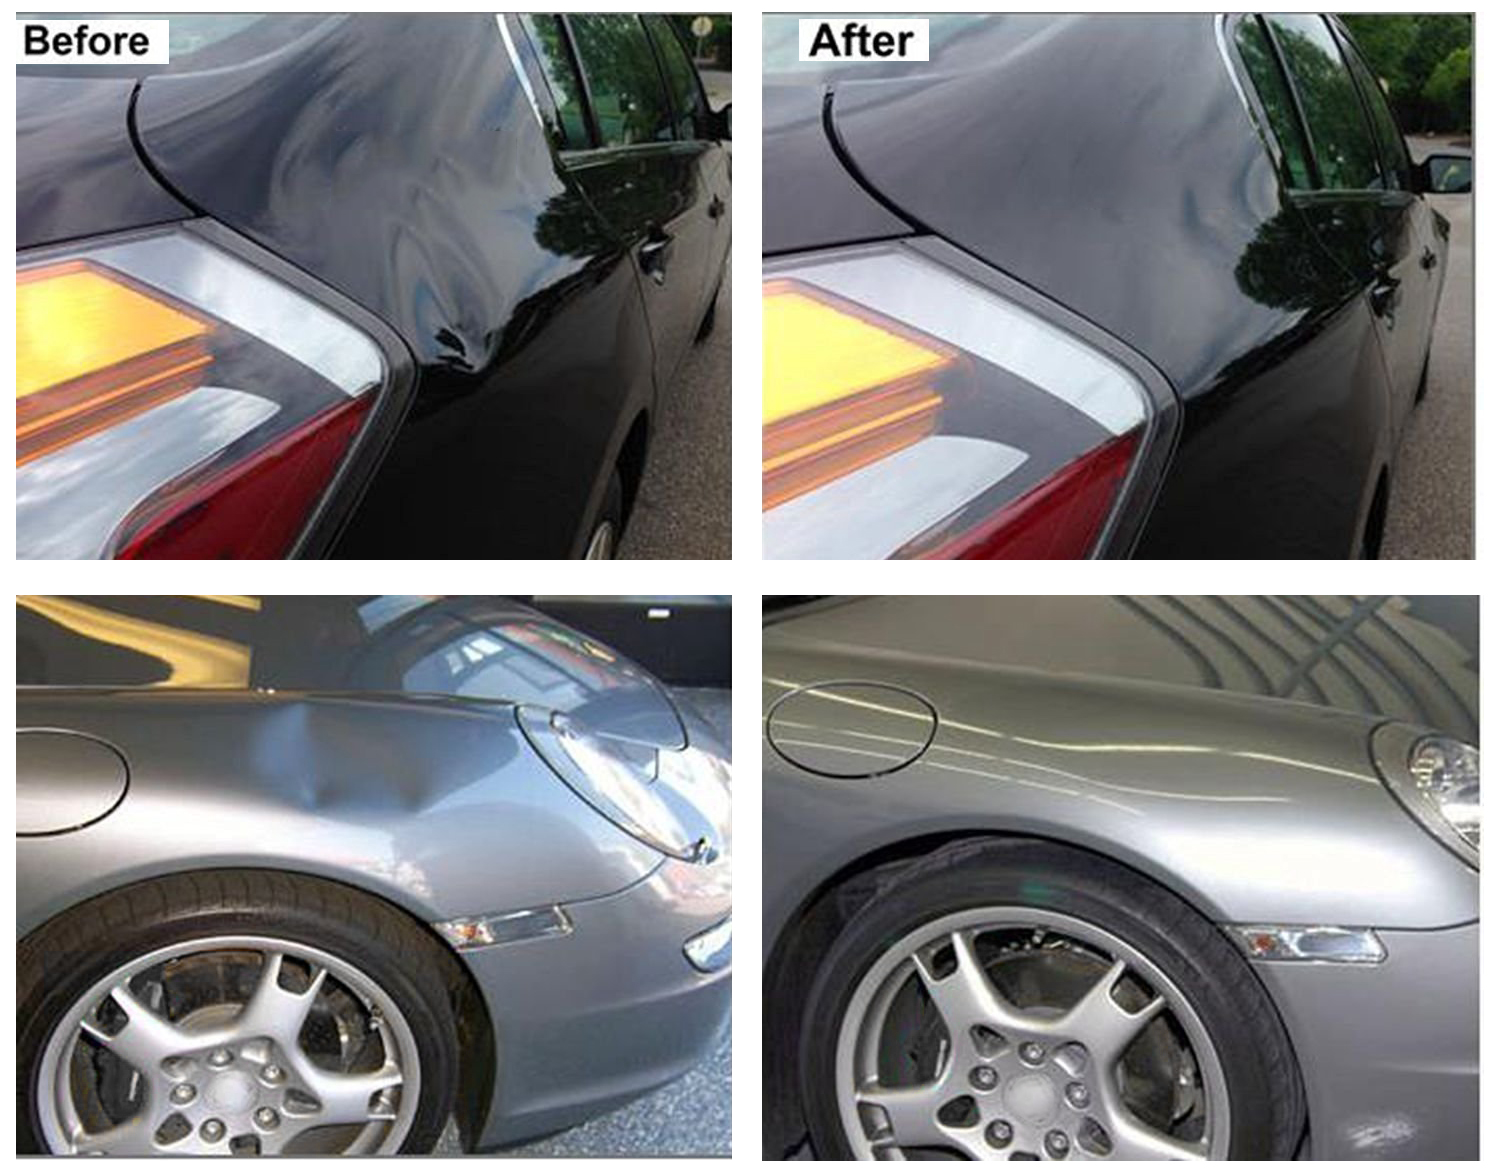 Before & After - Paintless Dent Repair  Removal (PDR)